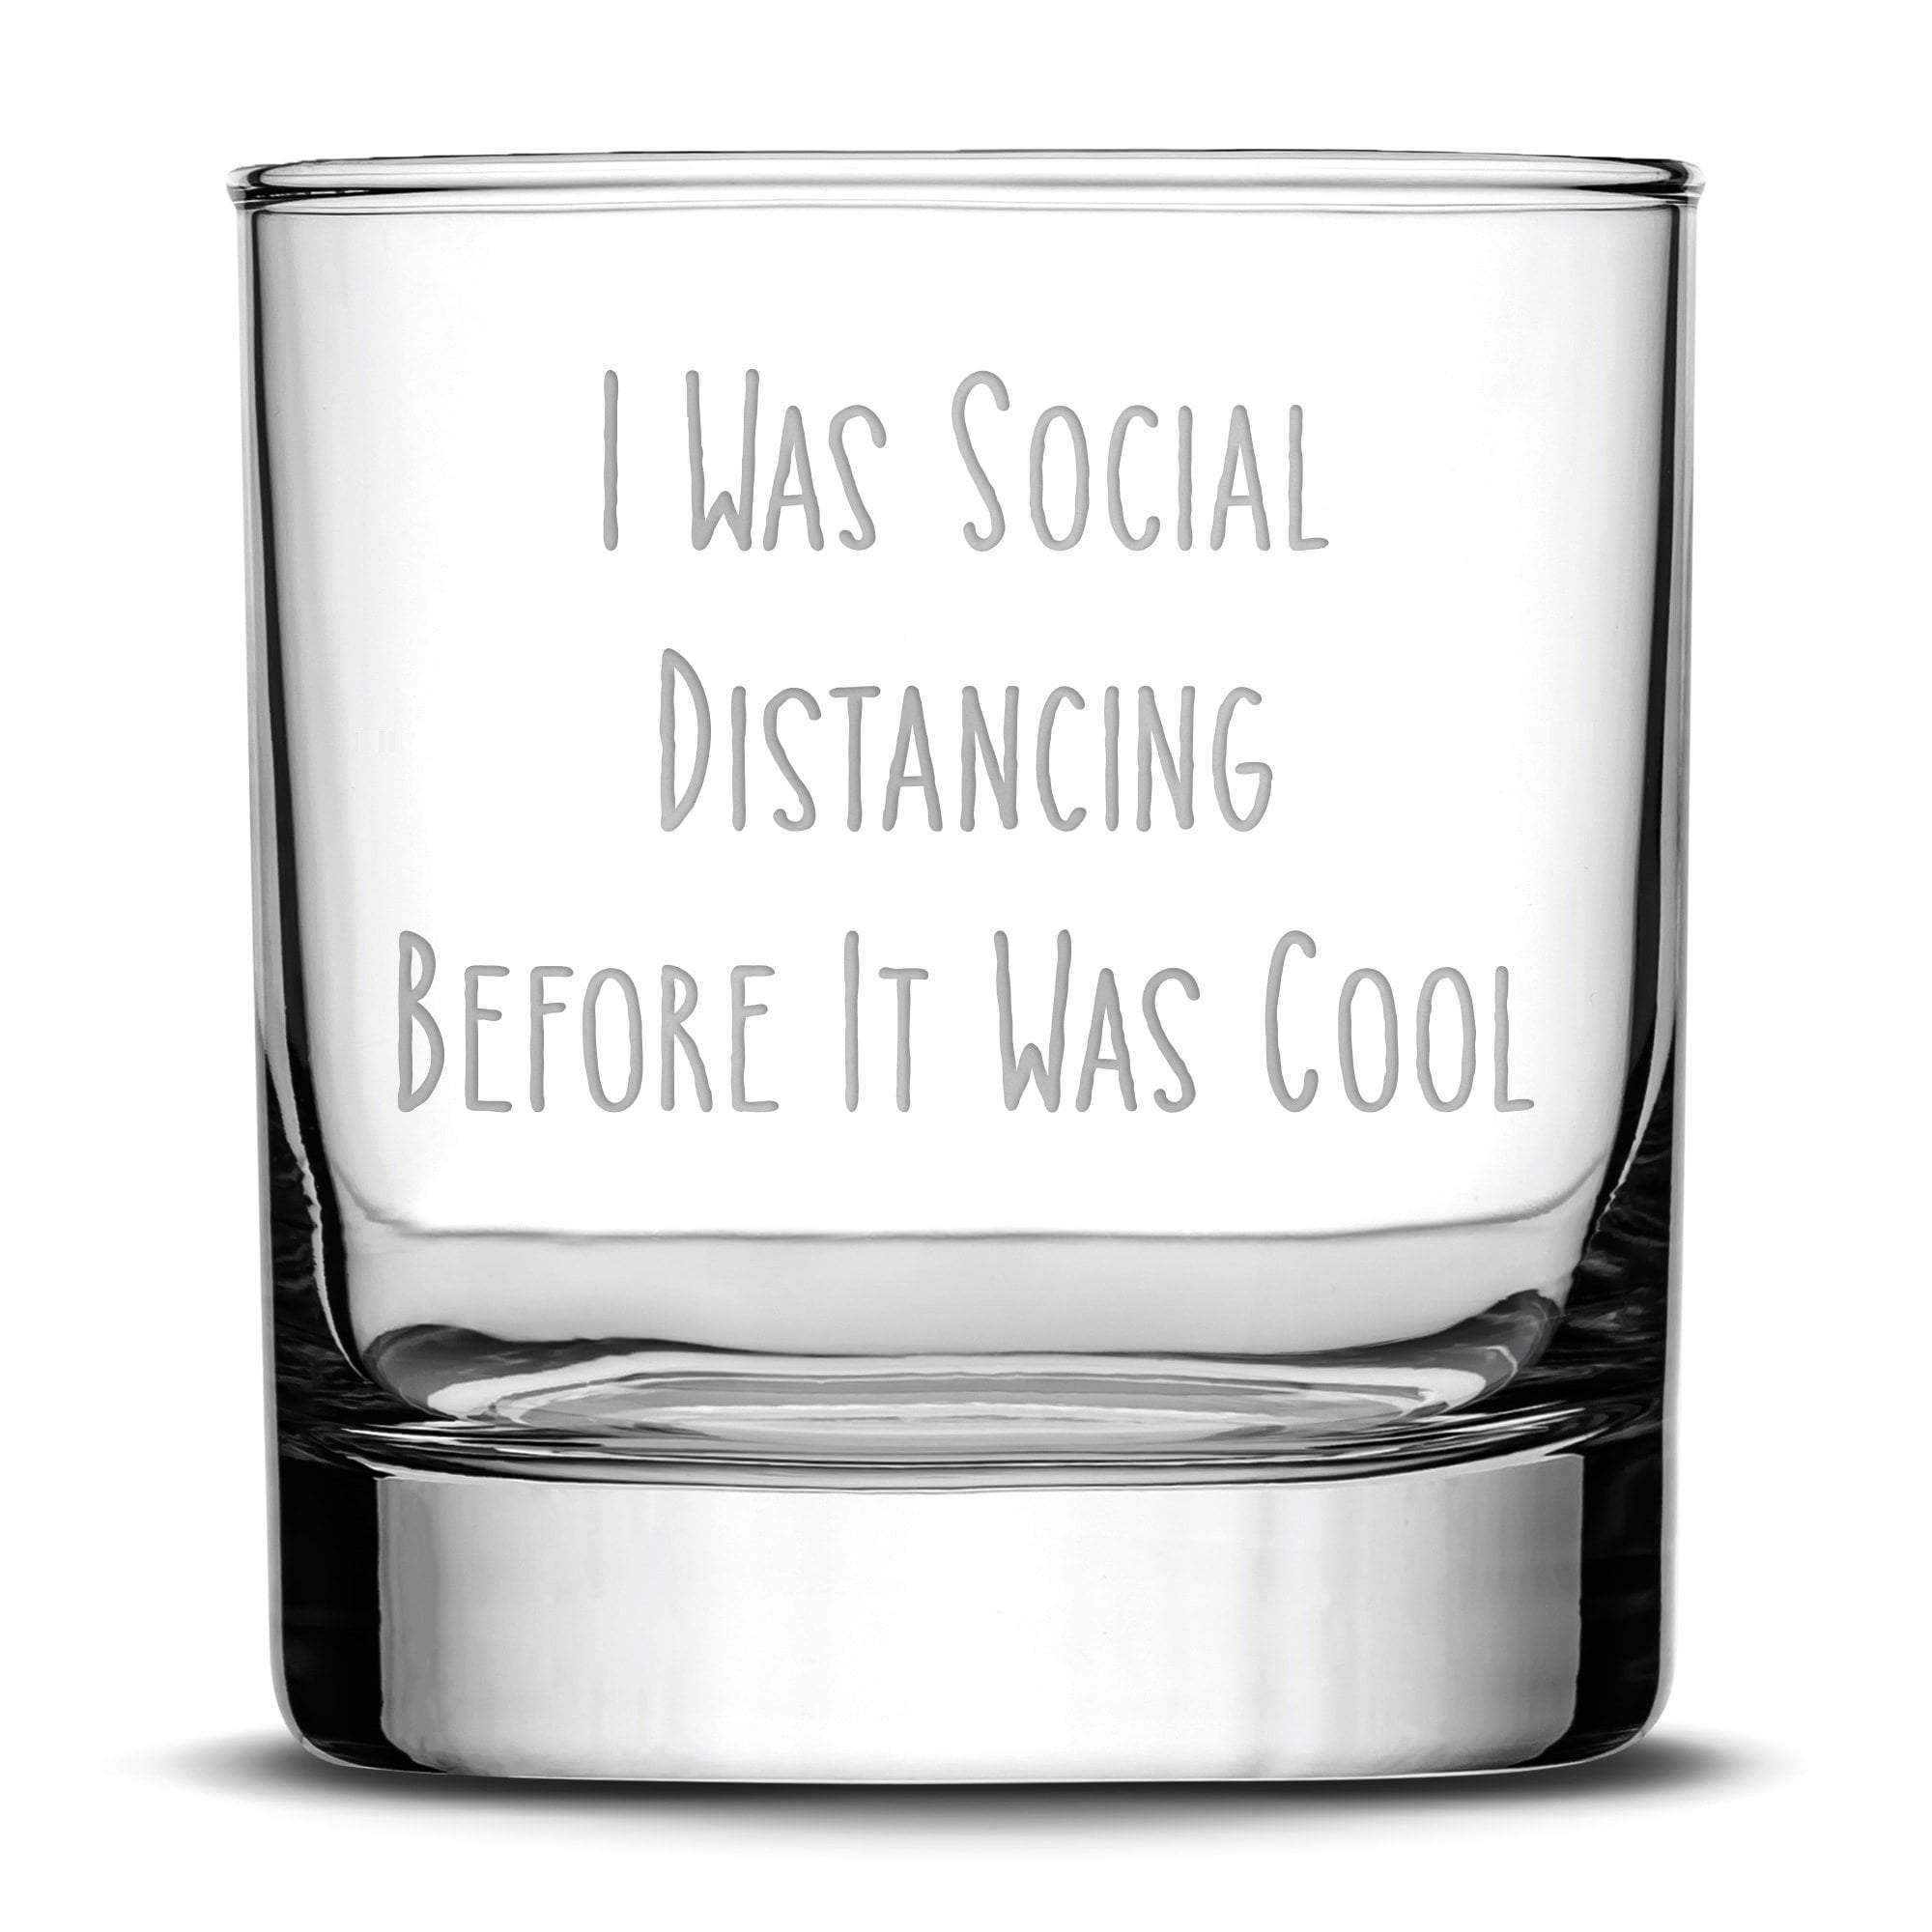 Premium Coronavirus Whiskey Glass, Etched Social Distancing Drinking Glasses,  Made in USA, 11oz, Laser Etched or Hand Etched